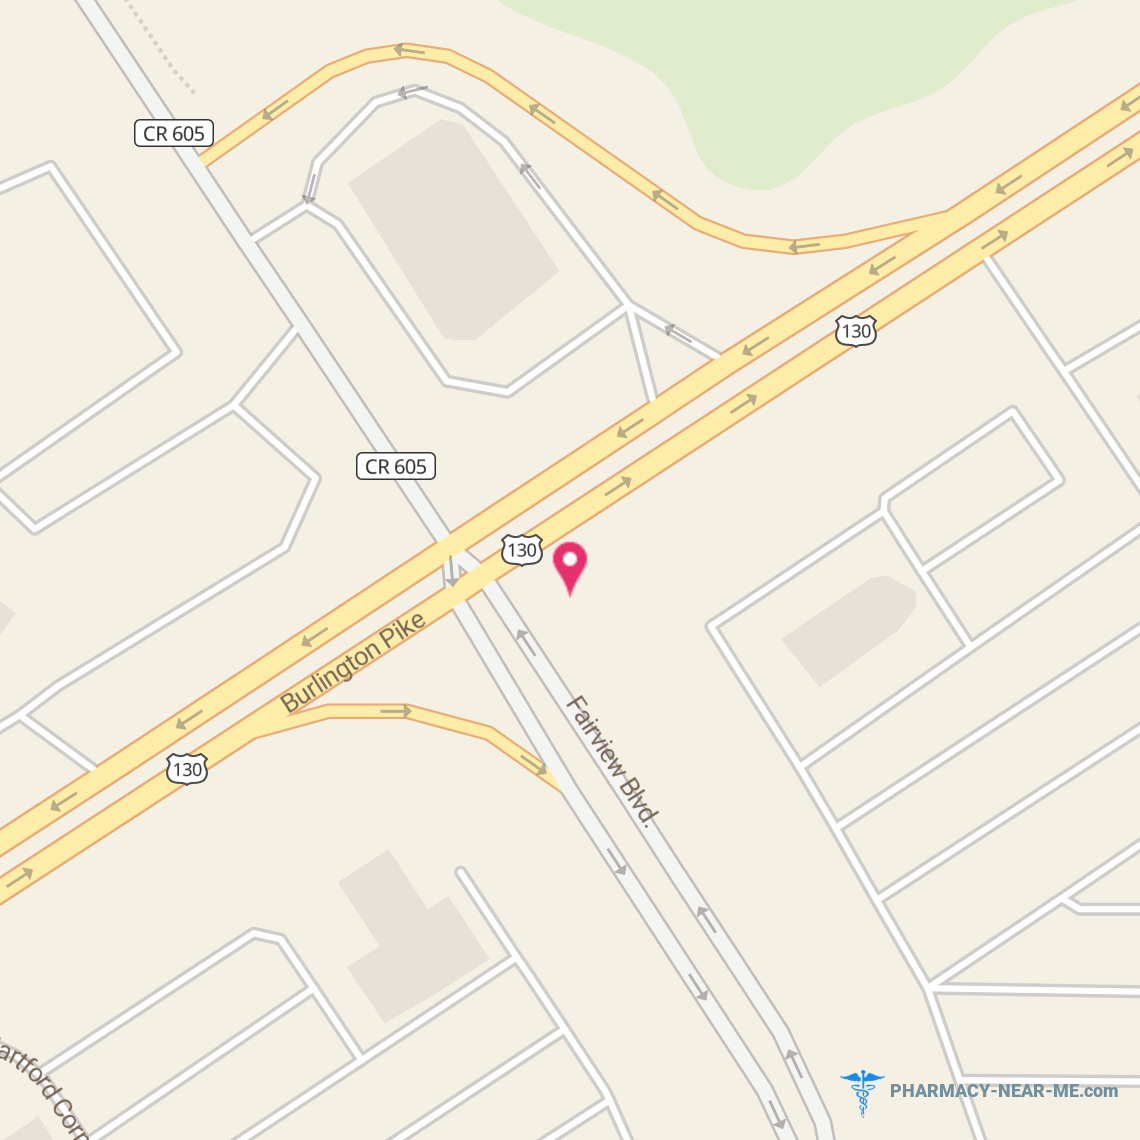 WALGREENS #11333 - Pharmacy Hours, Phone, Reviews & Information: 7001 Route 130, Delran, New Jersey 08075, United States